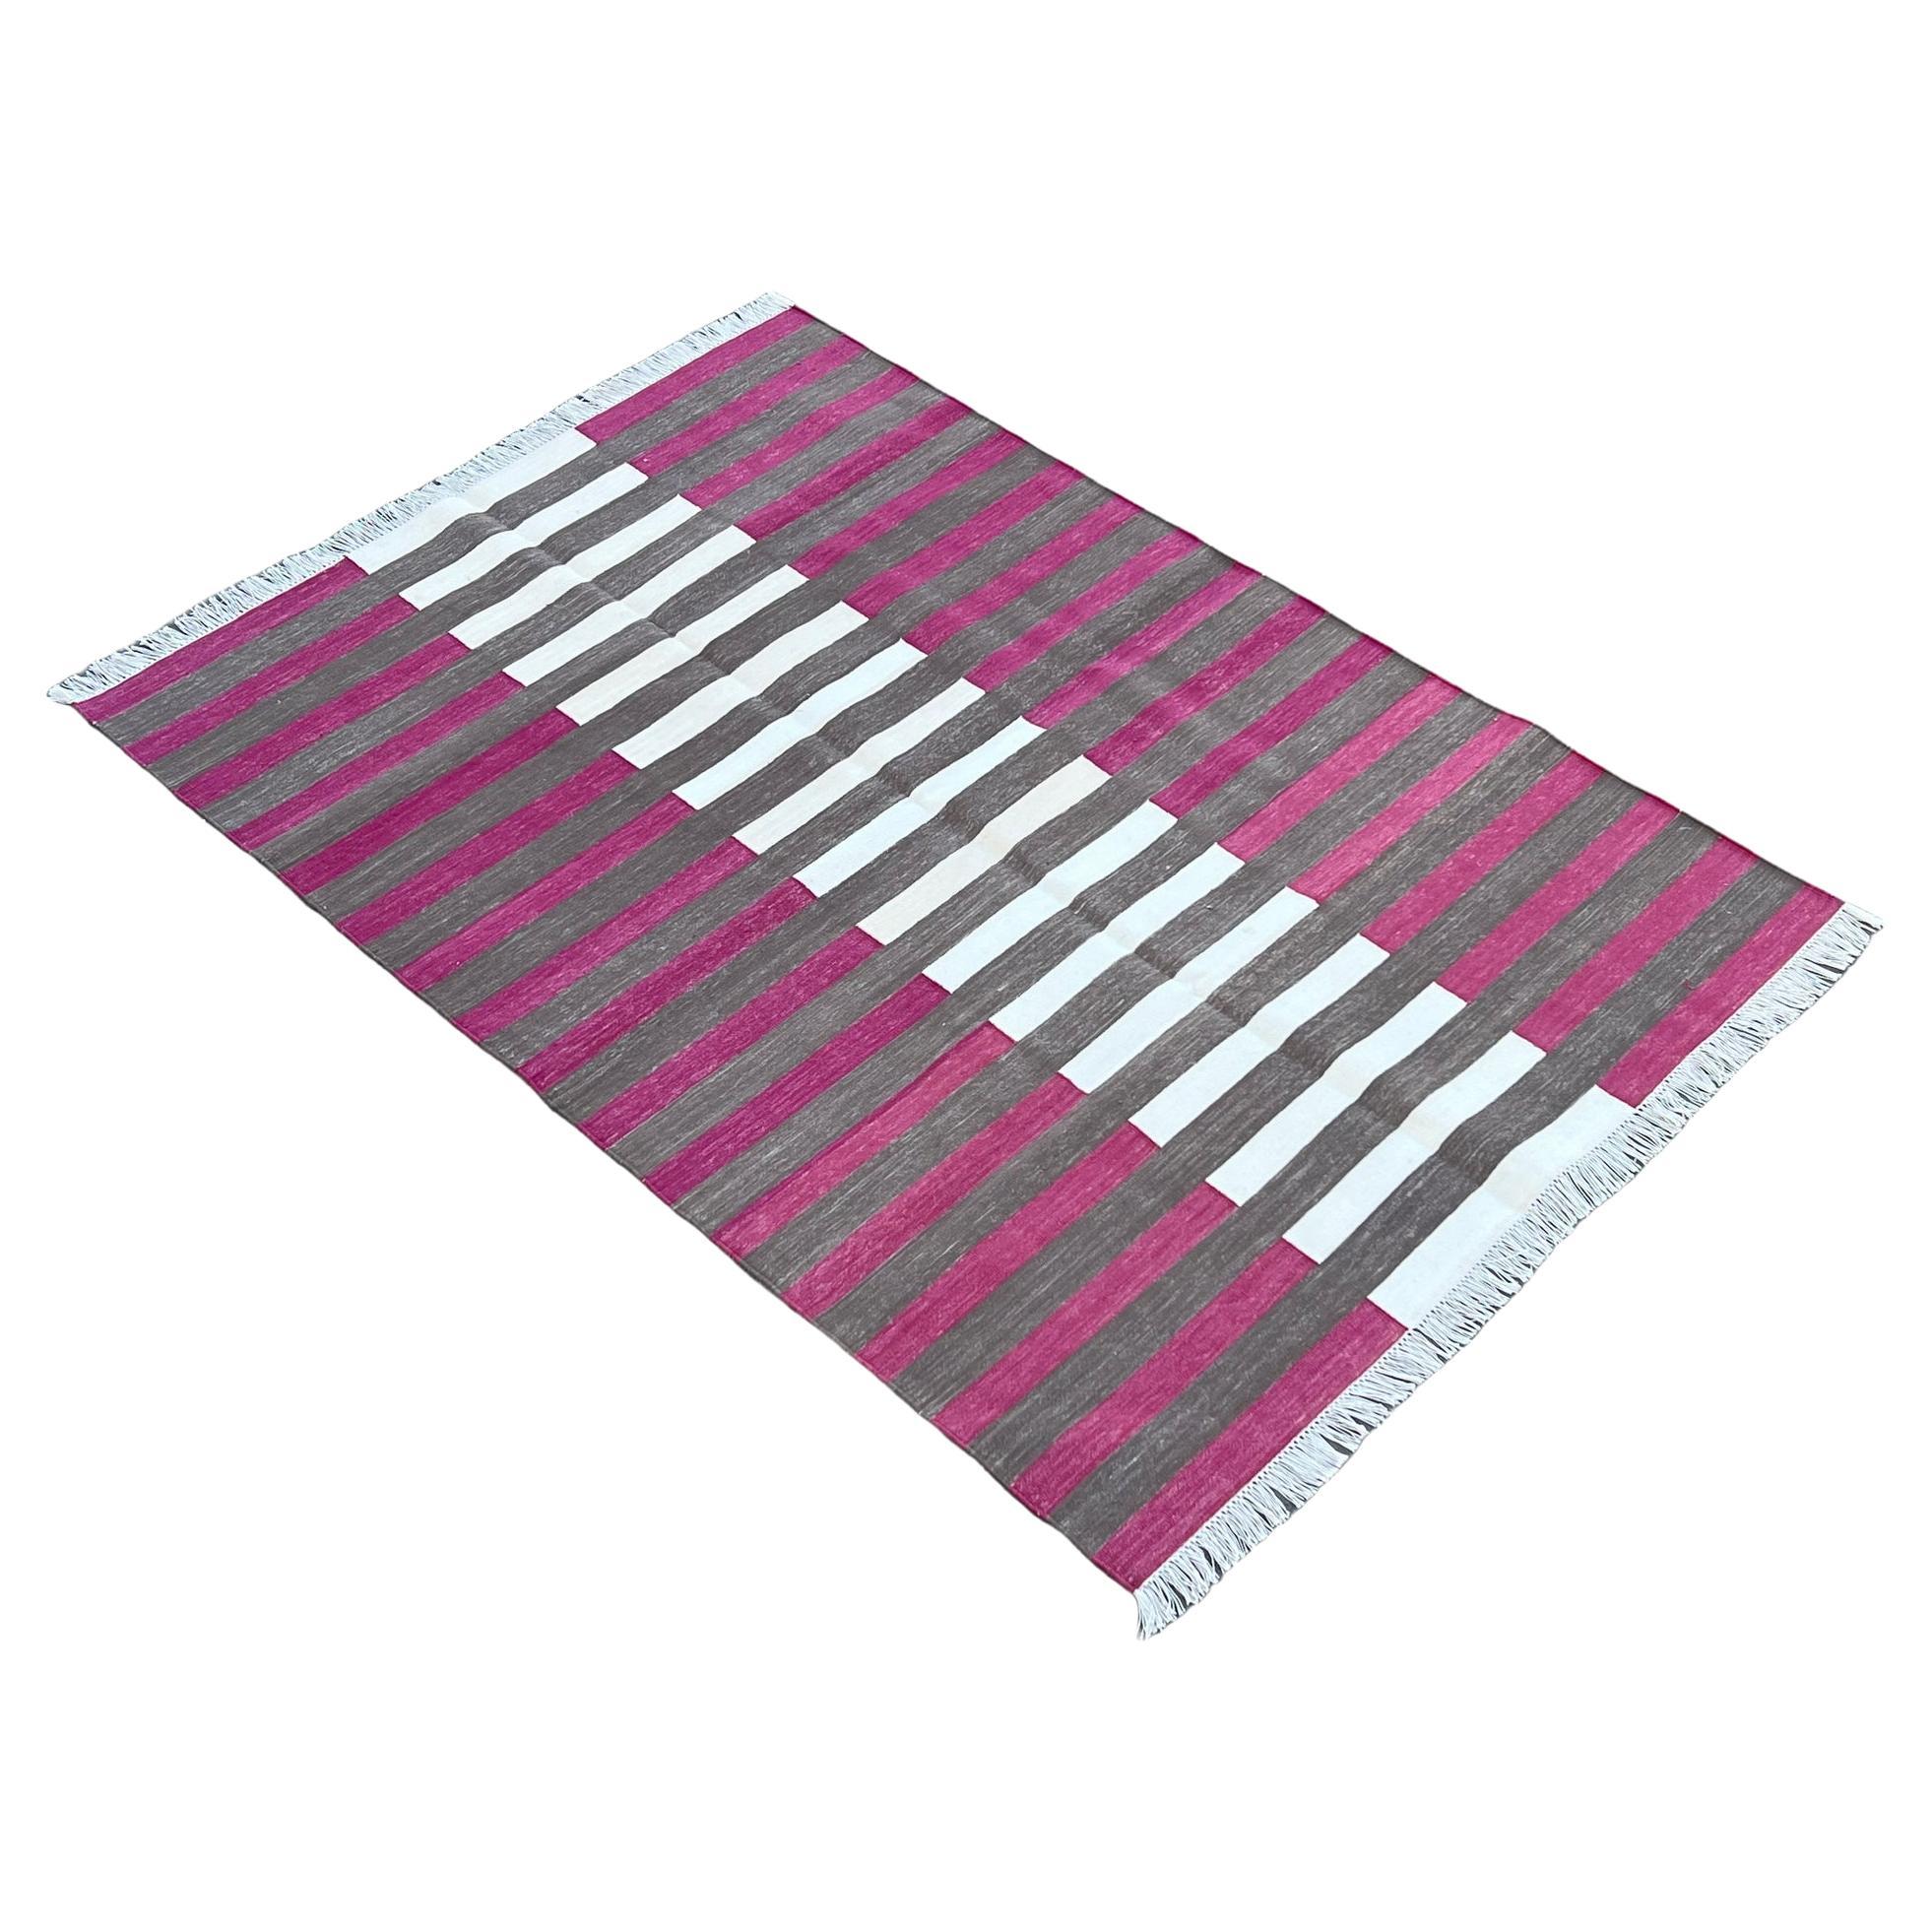 Handmade Cotton Area Flat Weave Rug, 4x6 Brown And Pink Striped Indian Dhurrie